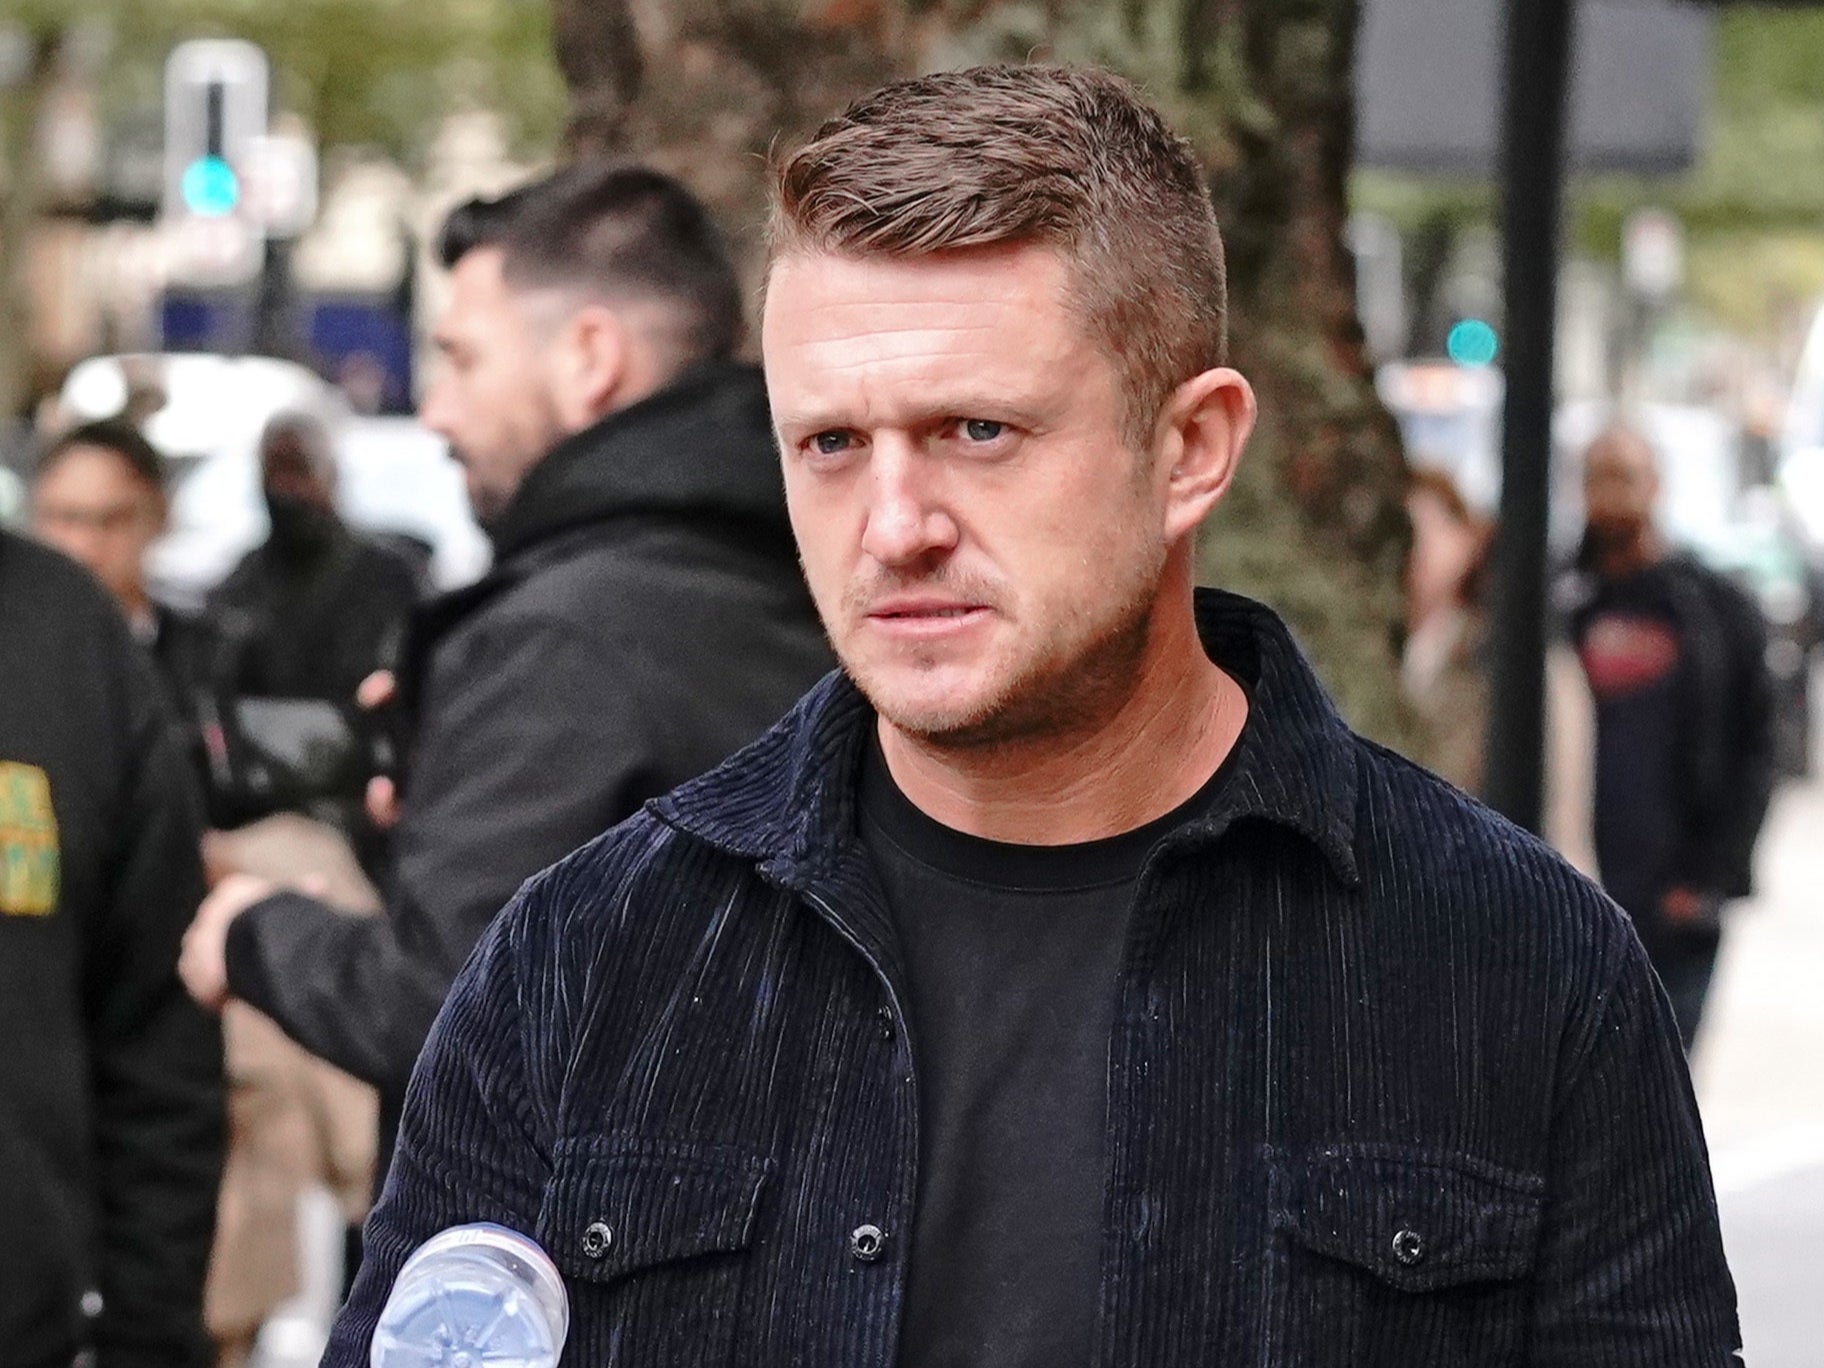 Tommy Robinson lost a libel case last year after falsely accusing a Syrian refugee schoolboy of attacking a girl and was ordered by a judge to pay £100,000